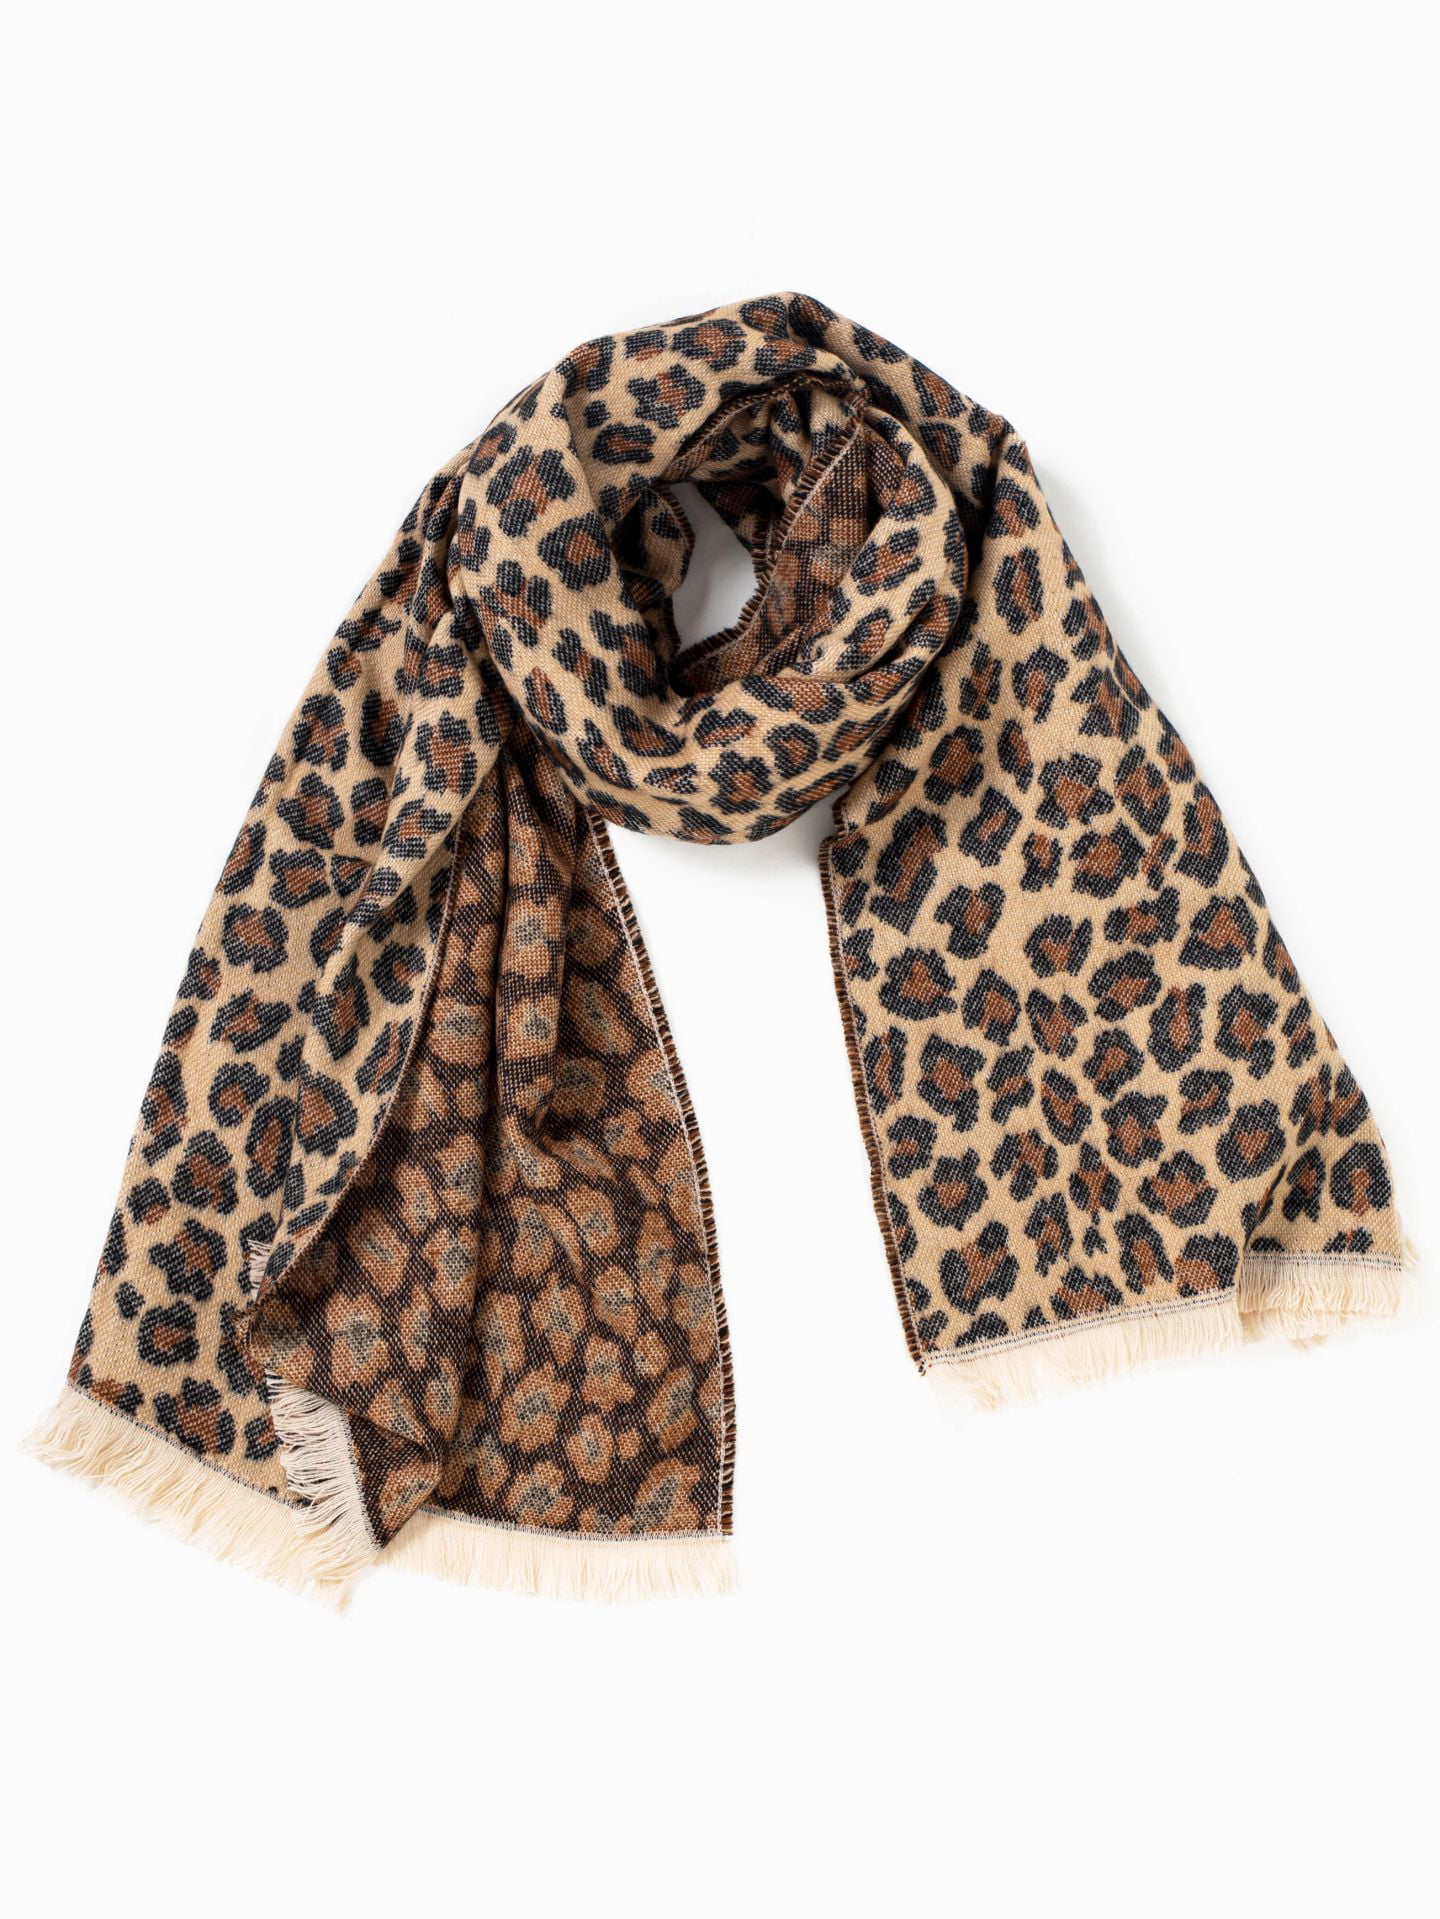 Scarf Collector Neck Scarf Gift Idea Fringed Cheetah Scarf Black Brown Scarf Light Coat Scarf Cheetah Coat Scarf Animal Print Scarf